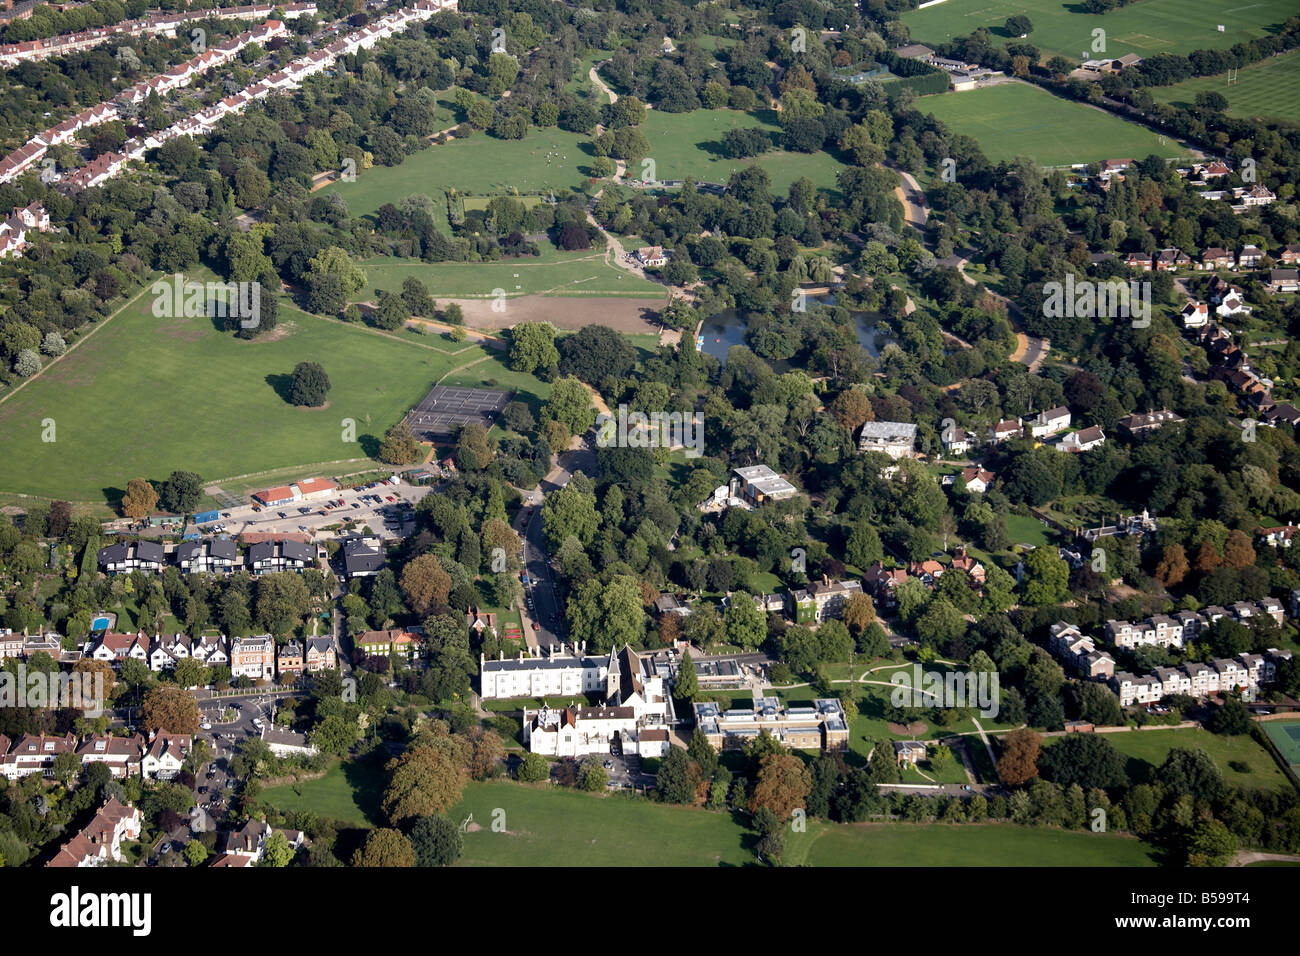 Aerial view east of Dulwich Park Boating lake Picture Gallery College Road College Road suburban houses London SE21 England UK Stock Photo